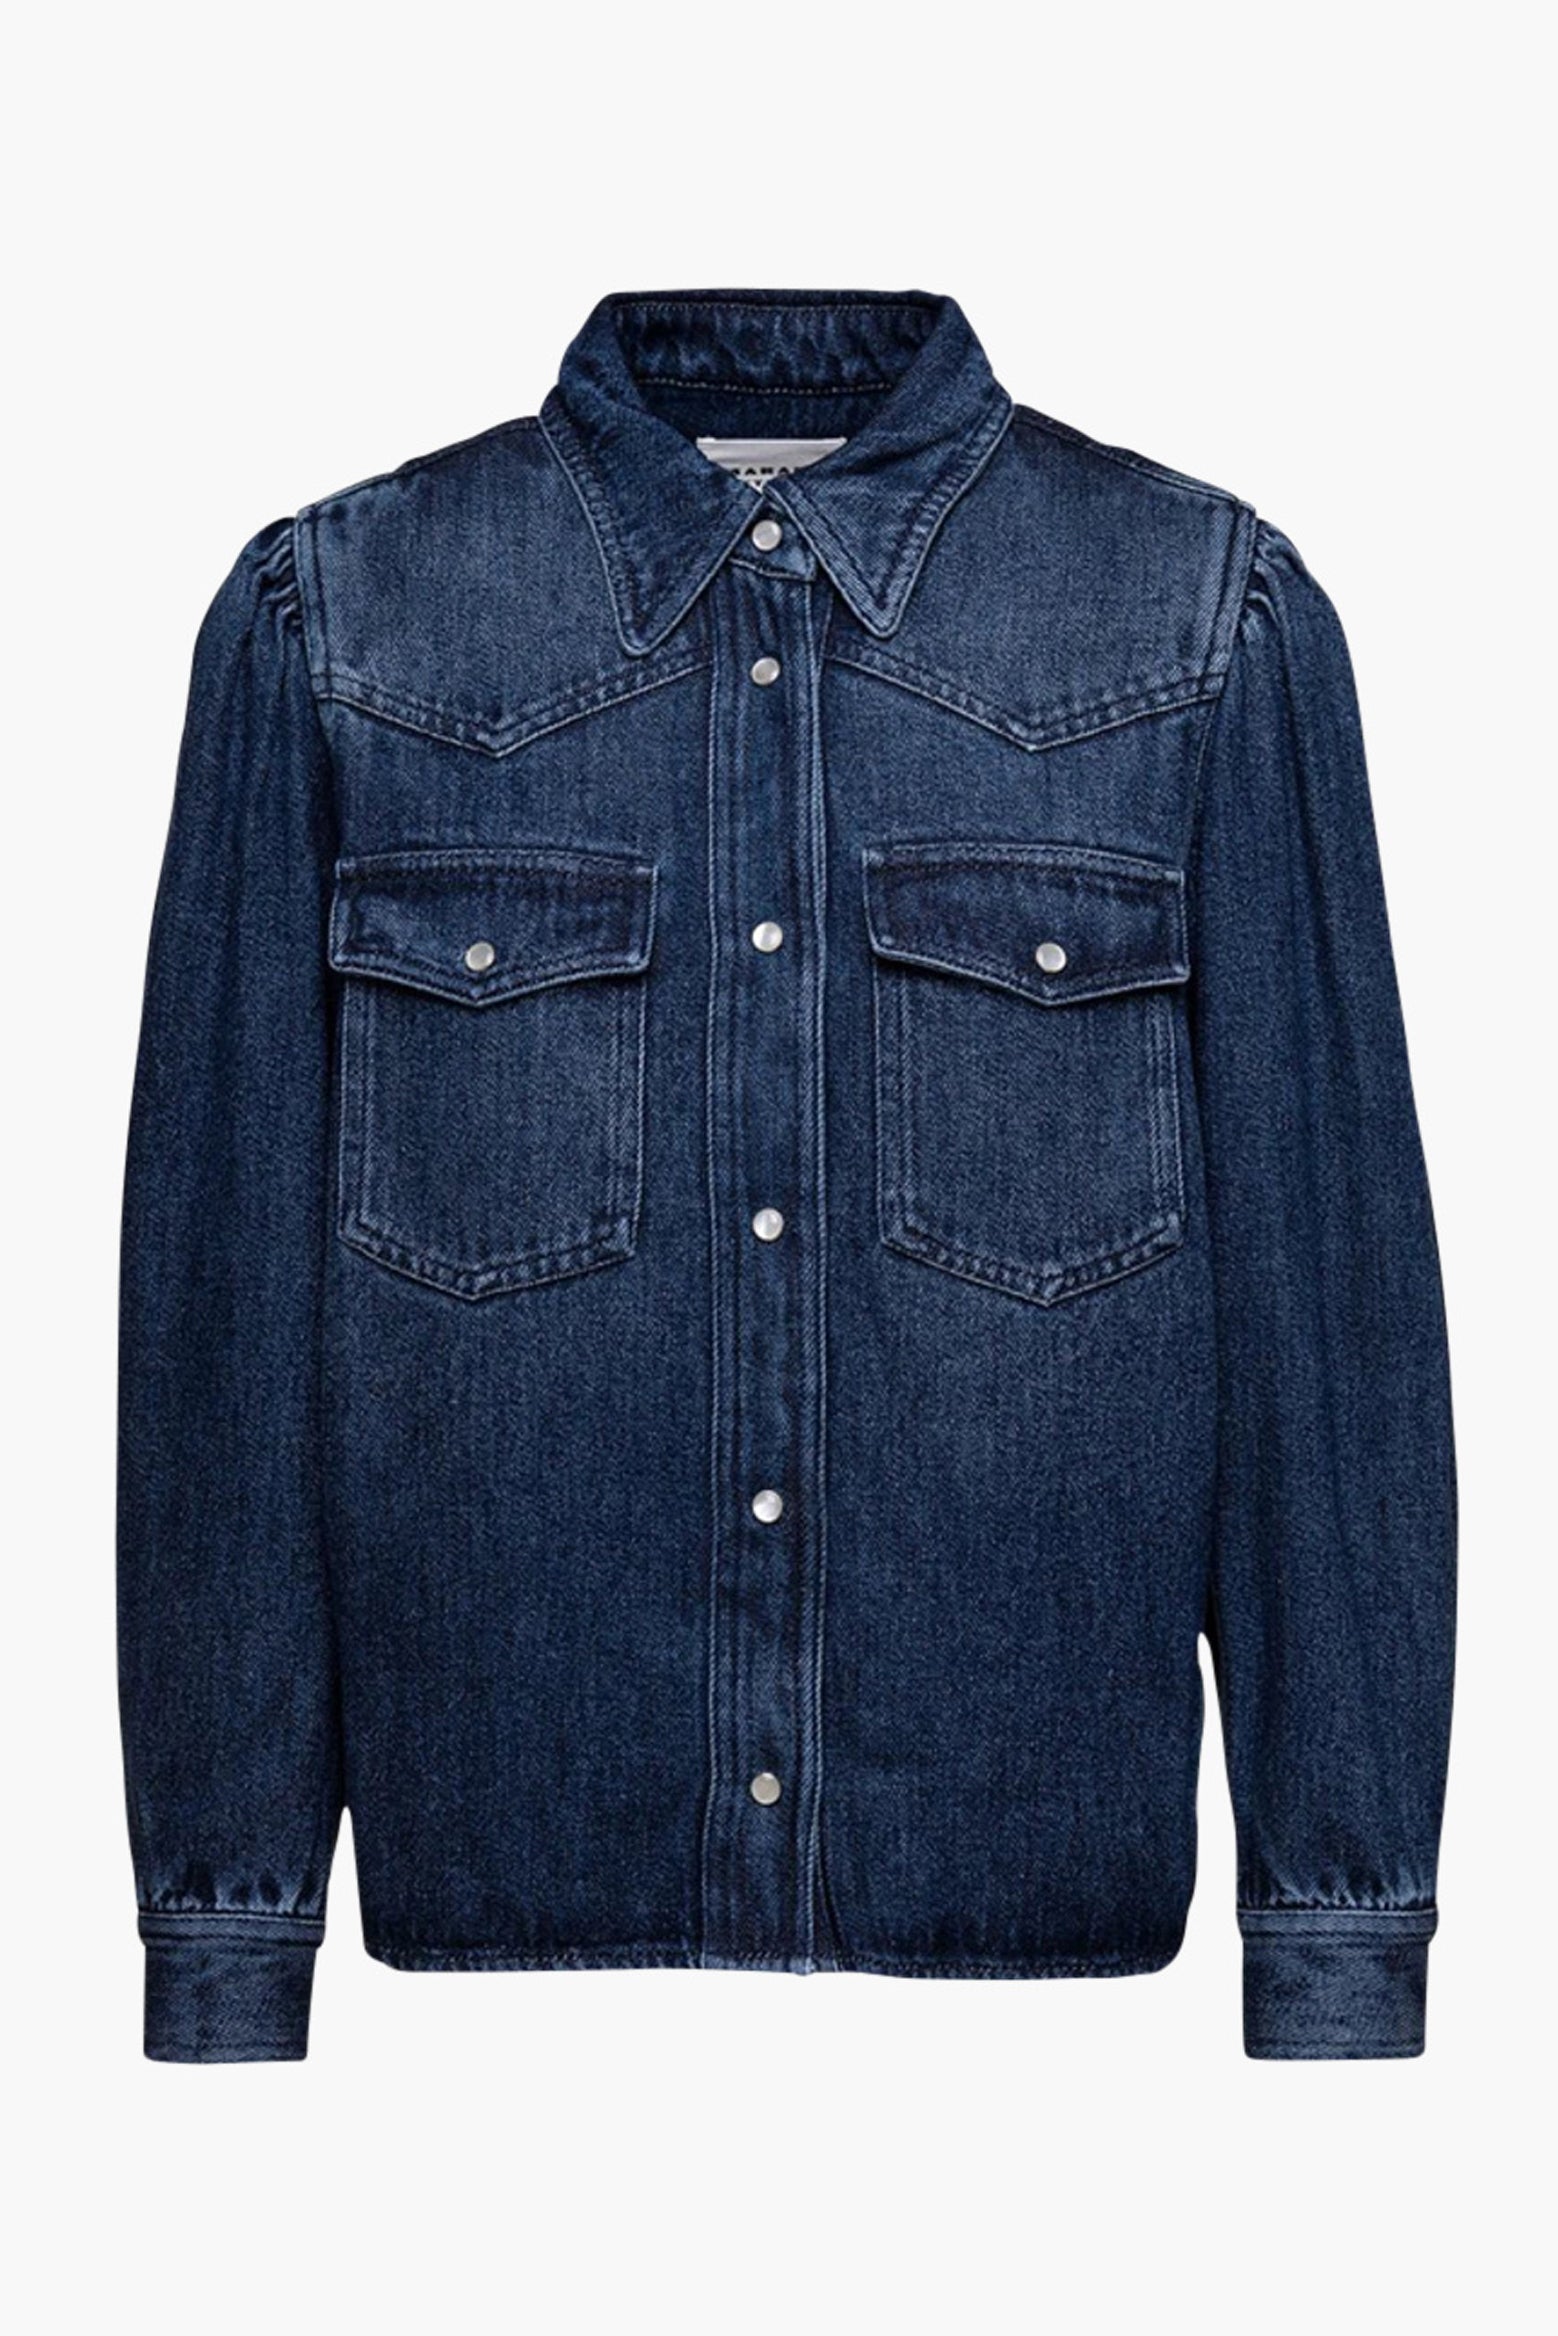 The Isabel Marant Tahisse Fluid Denim Shirt in Blue available at The New Trend Australia.